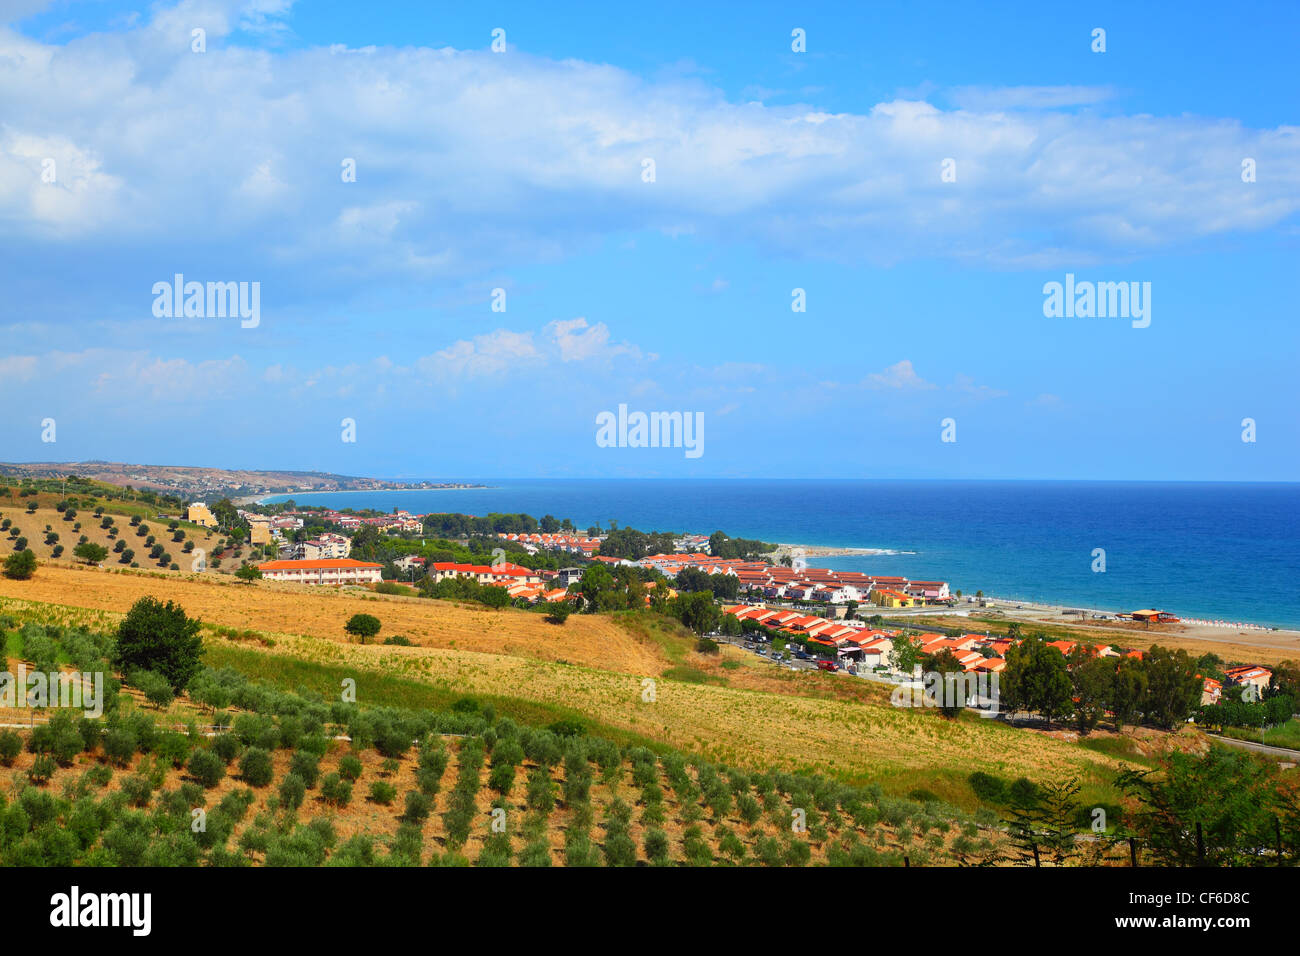 White houses on coast near hill with green trees and bushes Stock Photo